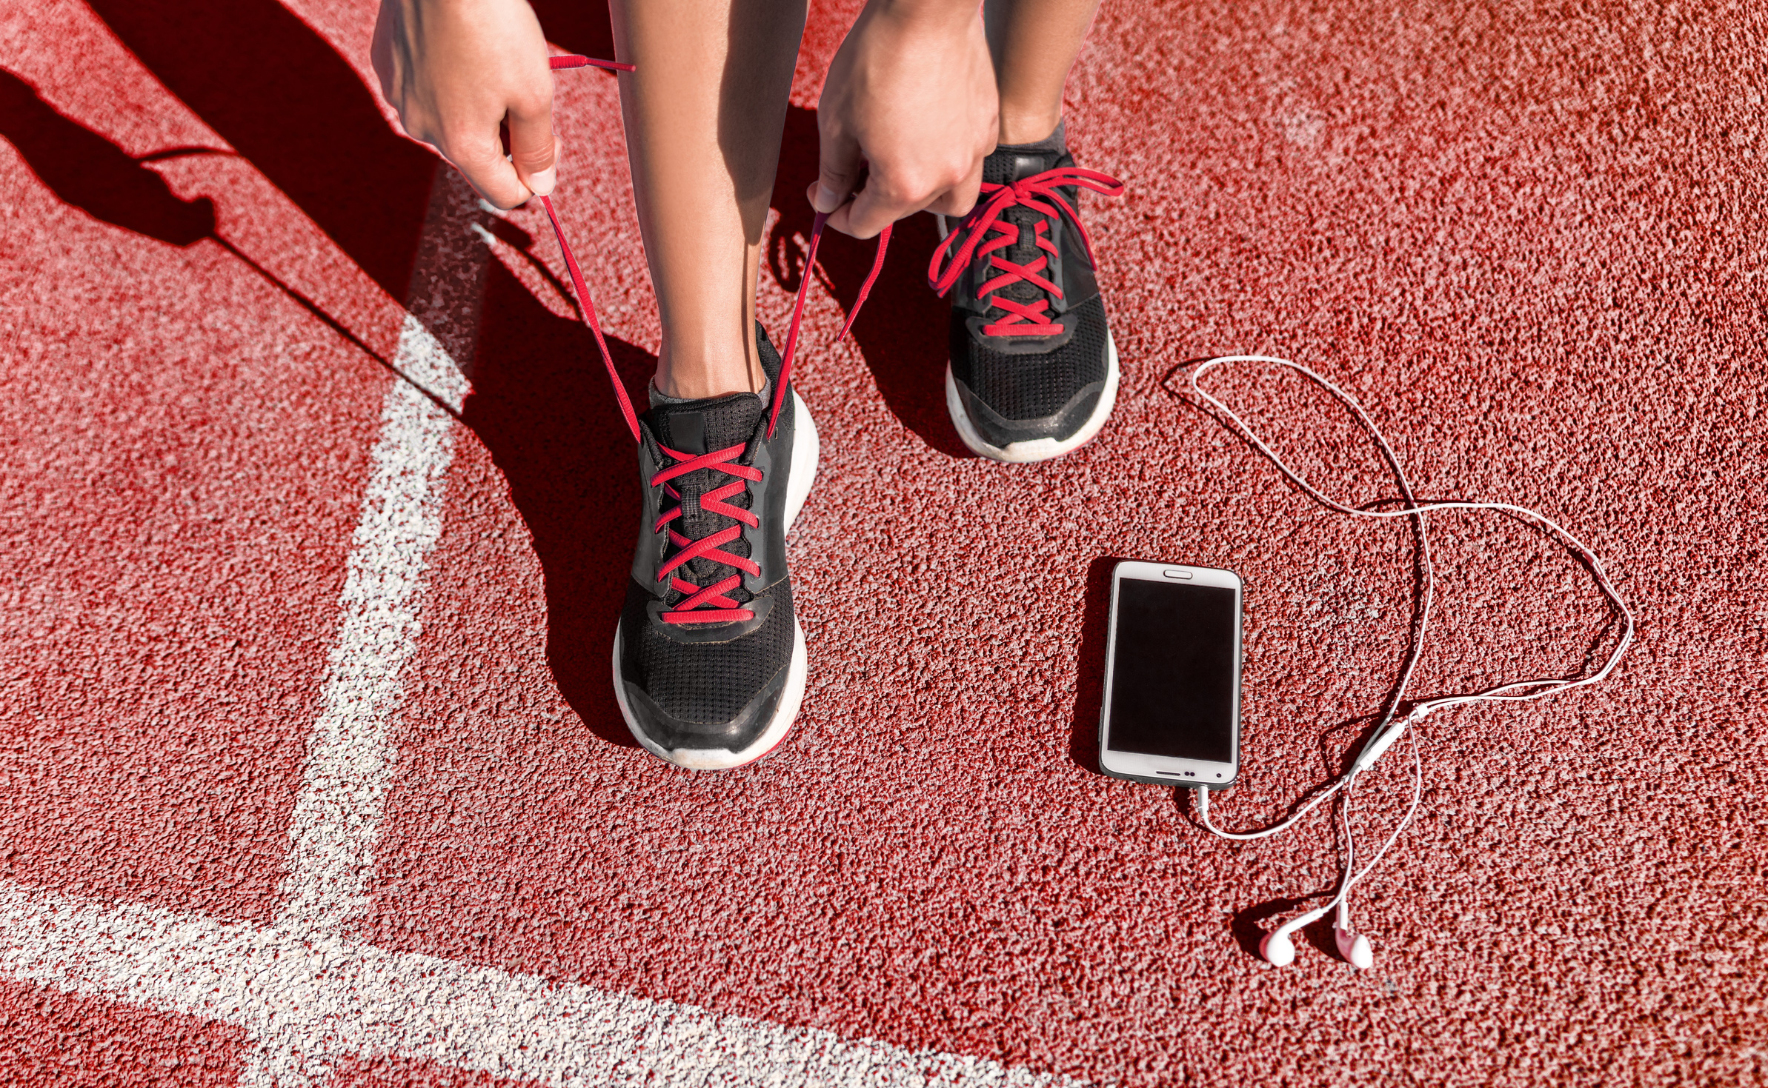 A runner on an athletic track pulls on the laces of their untied running shoes. Next to their feet is a smartphone and headphones.